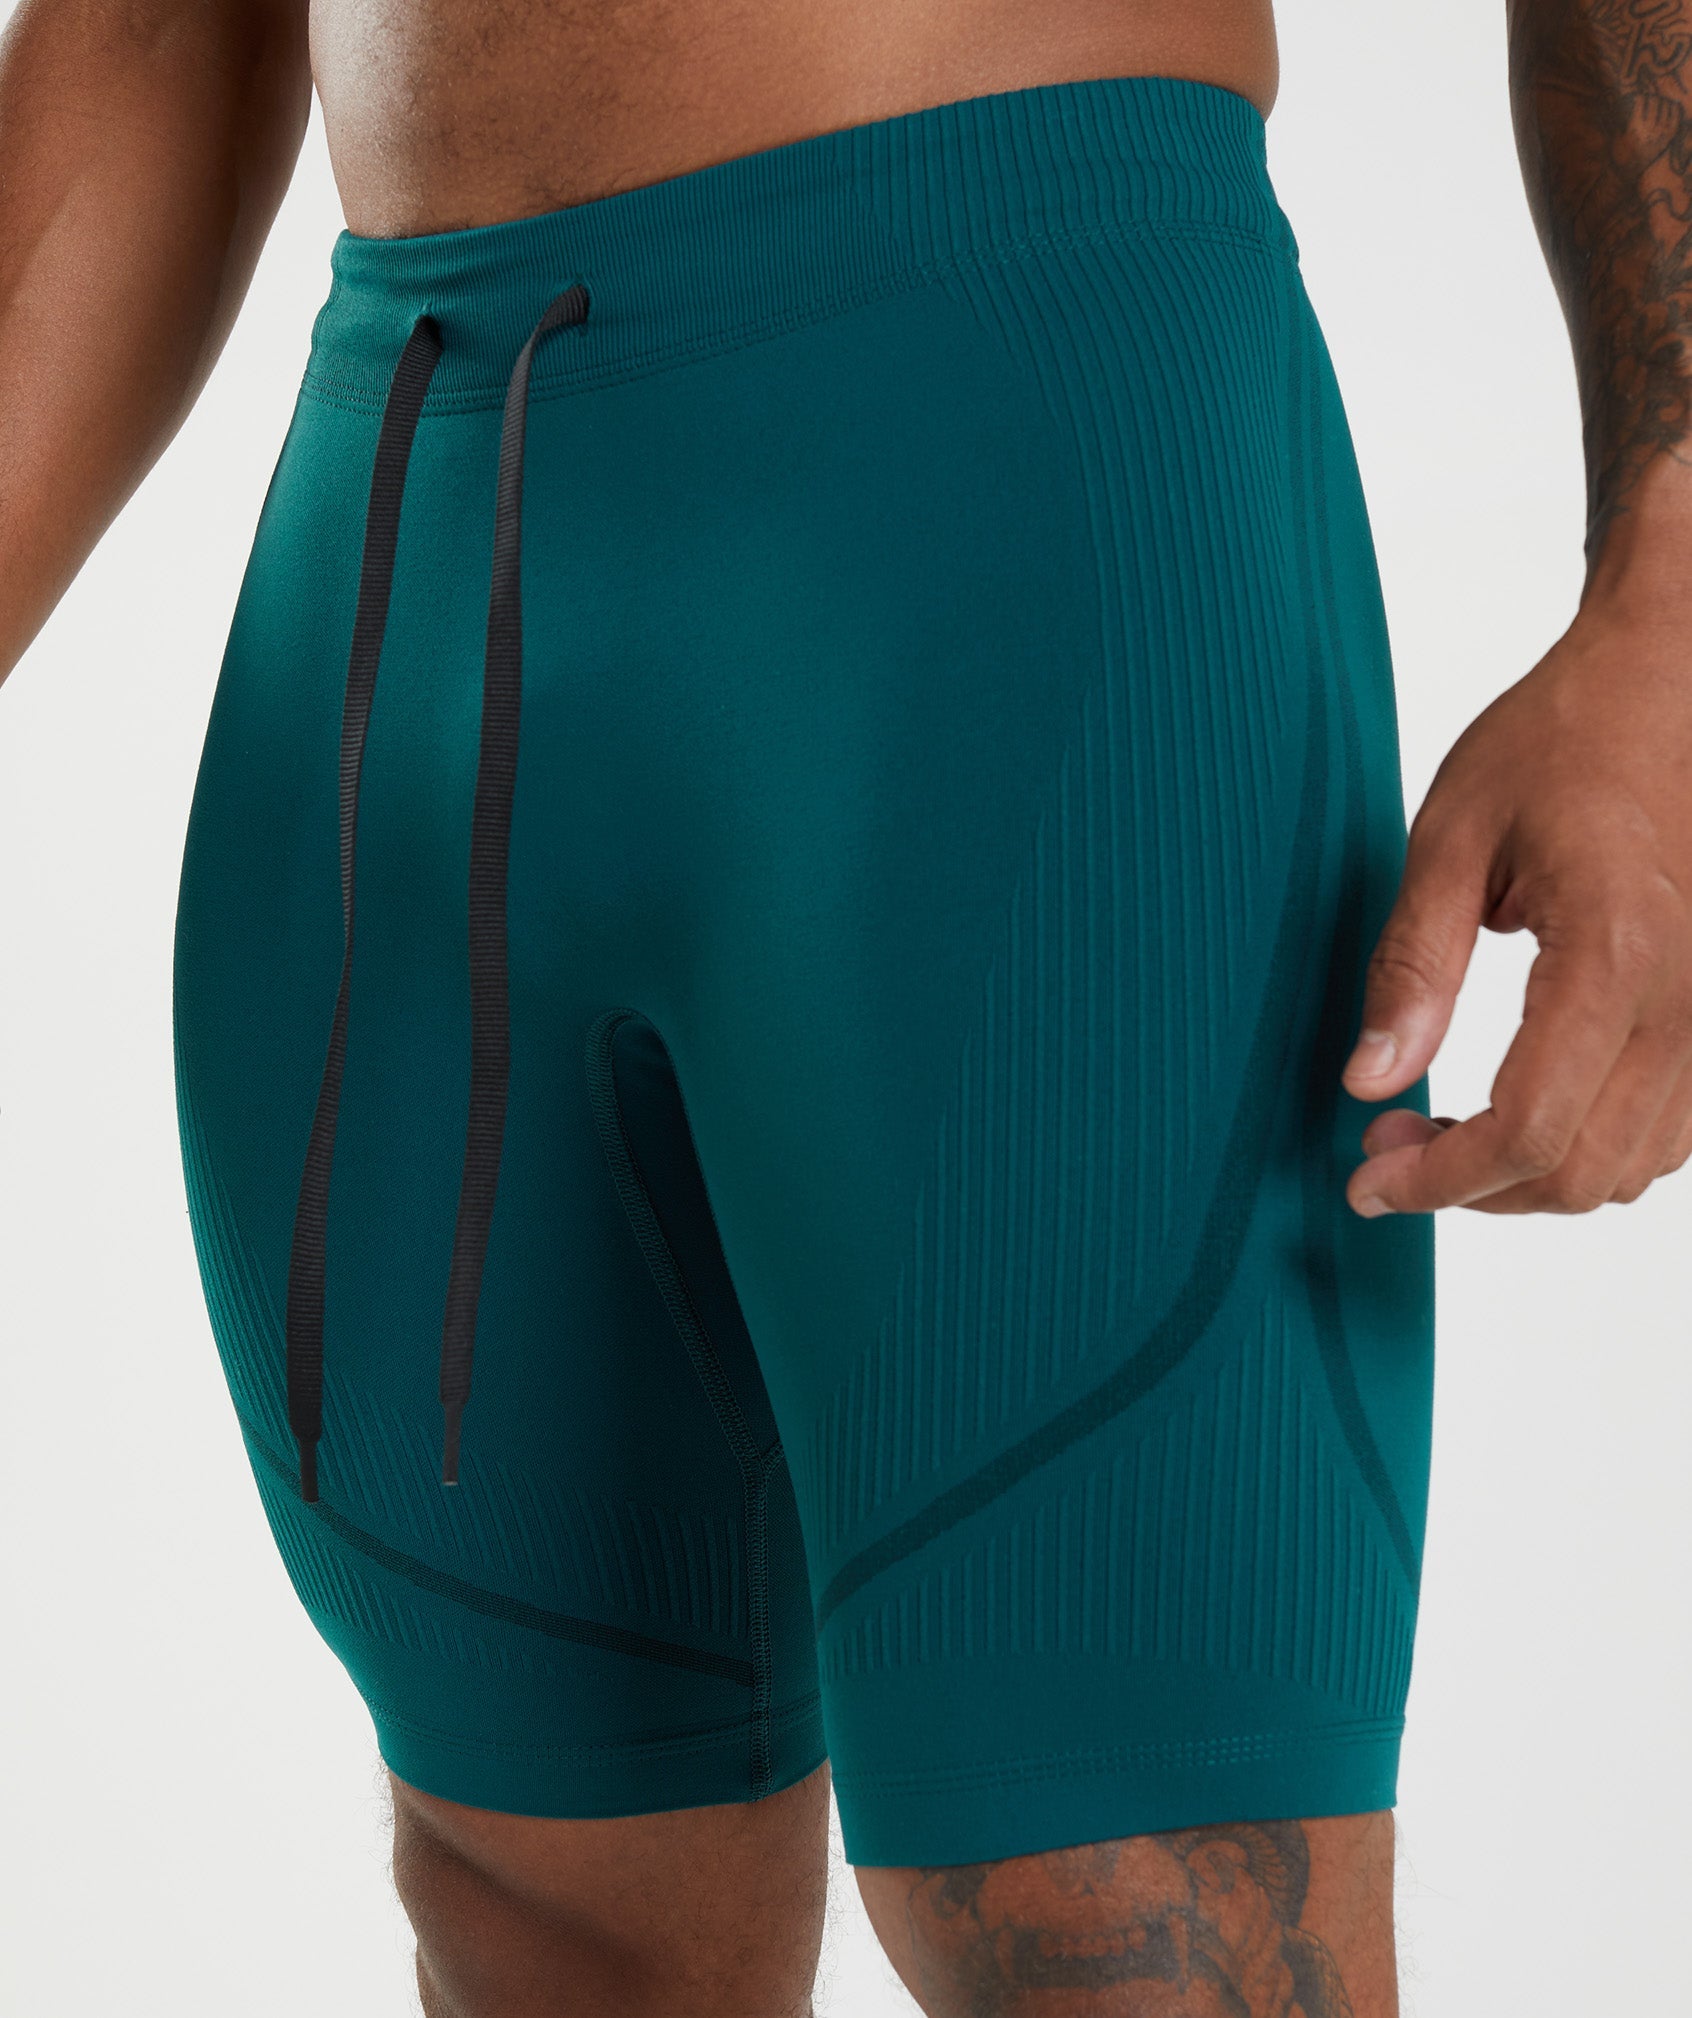 315 Seamless 1/2 Shorts in Winter Teal/Black - view 6